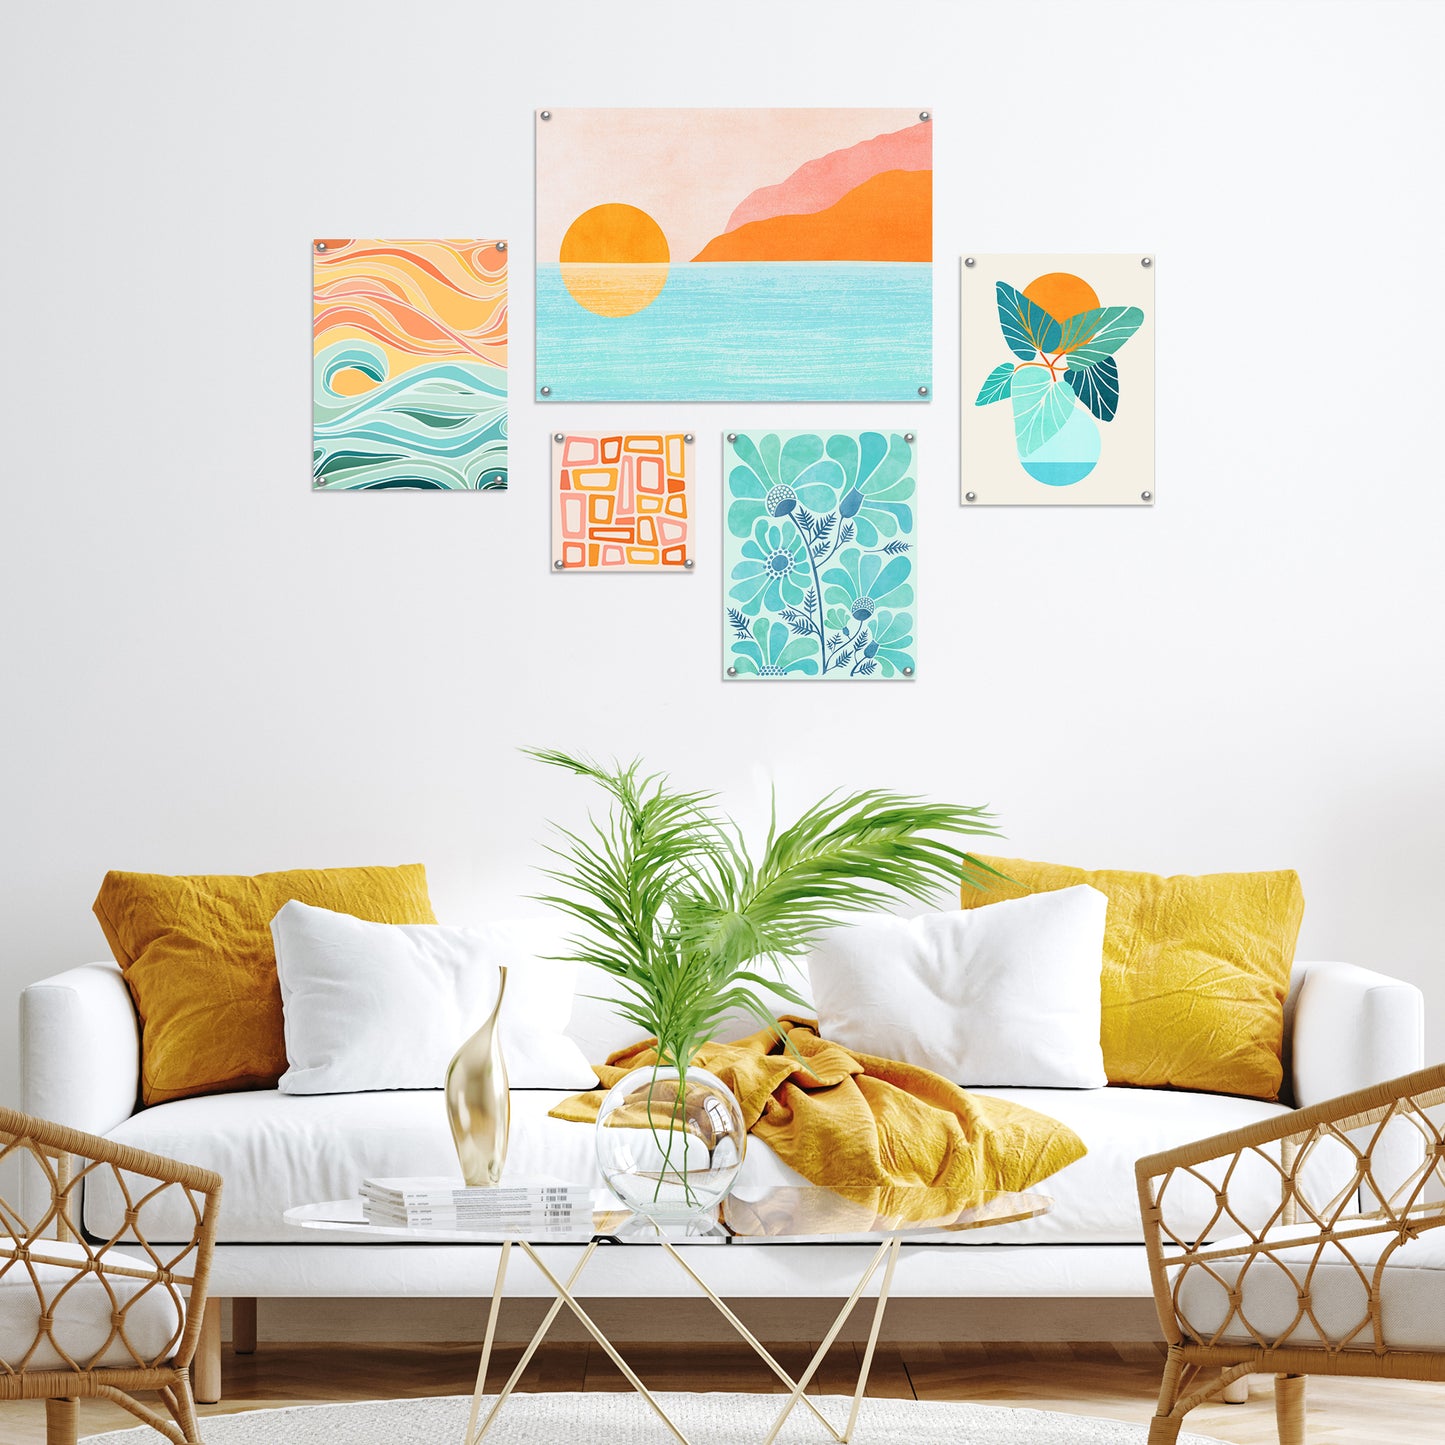 5 Piece Poster Gallery Wall Art Set - Pastel Color Abstract Botanical Sea - Print